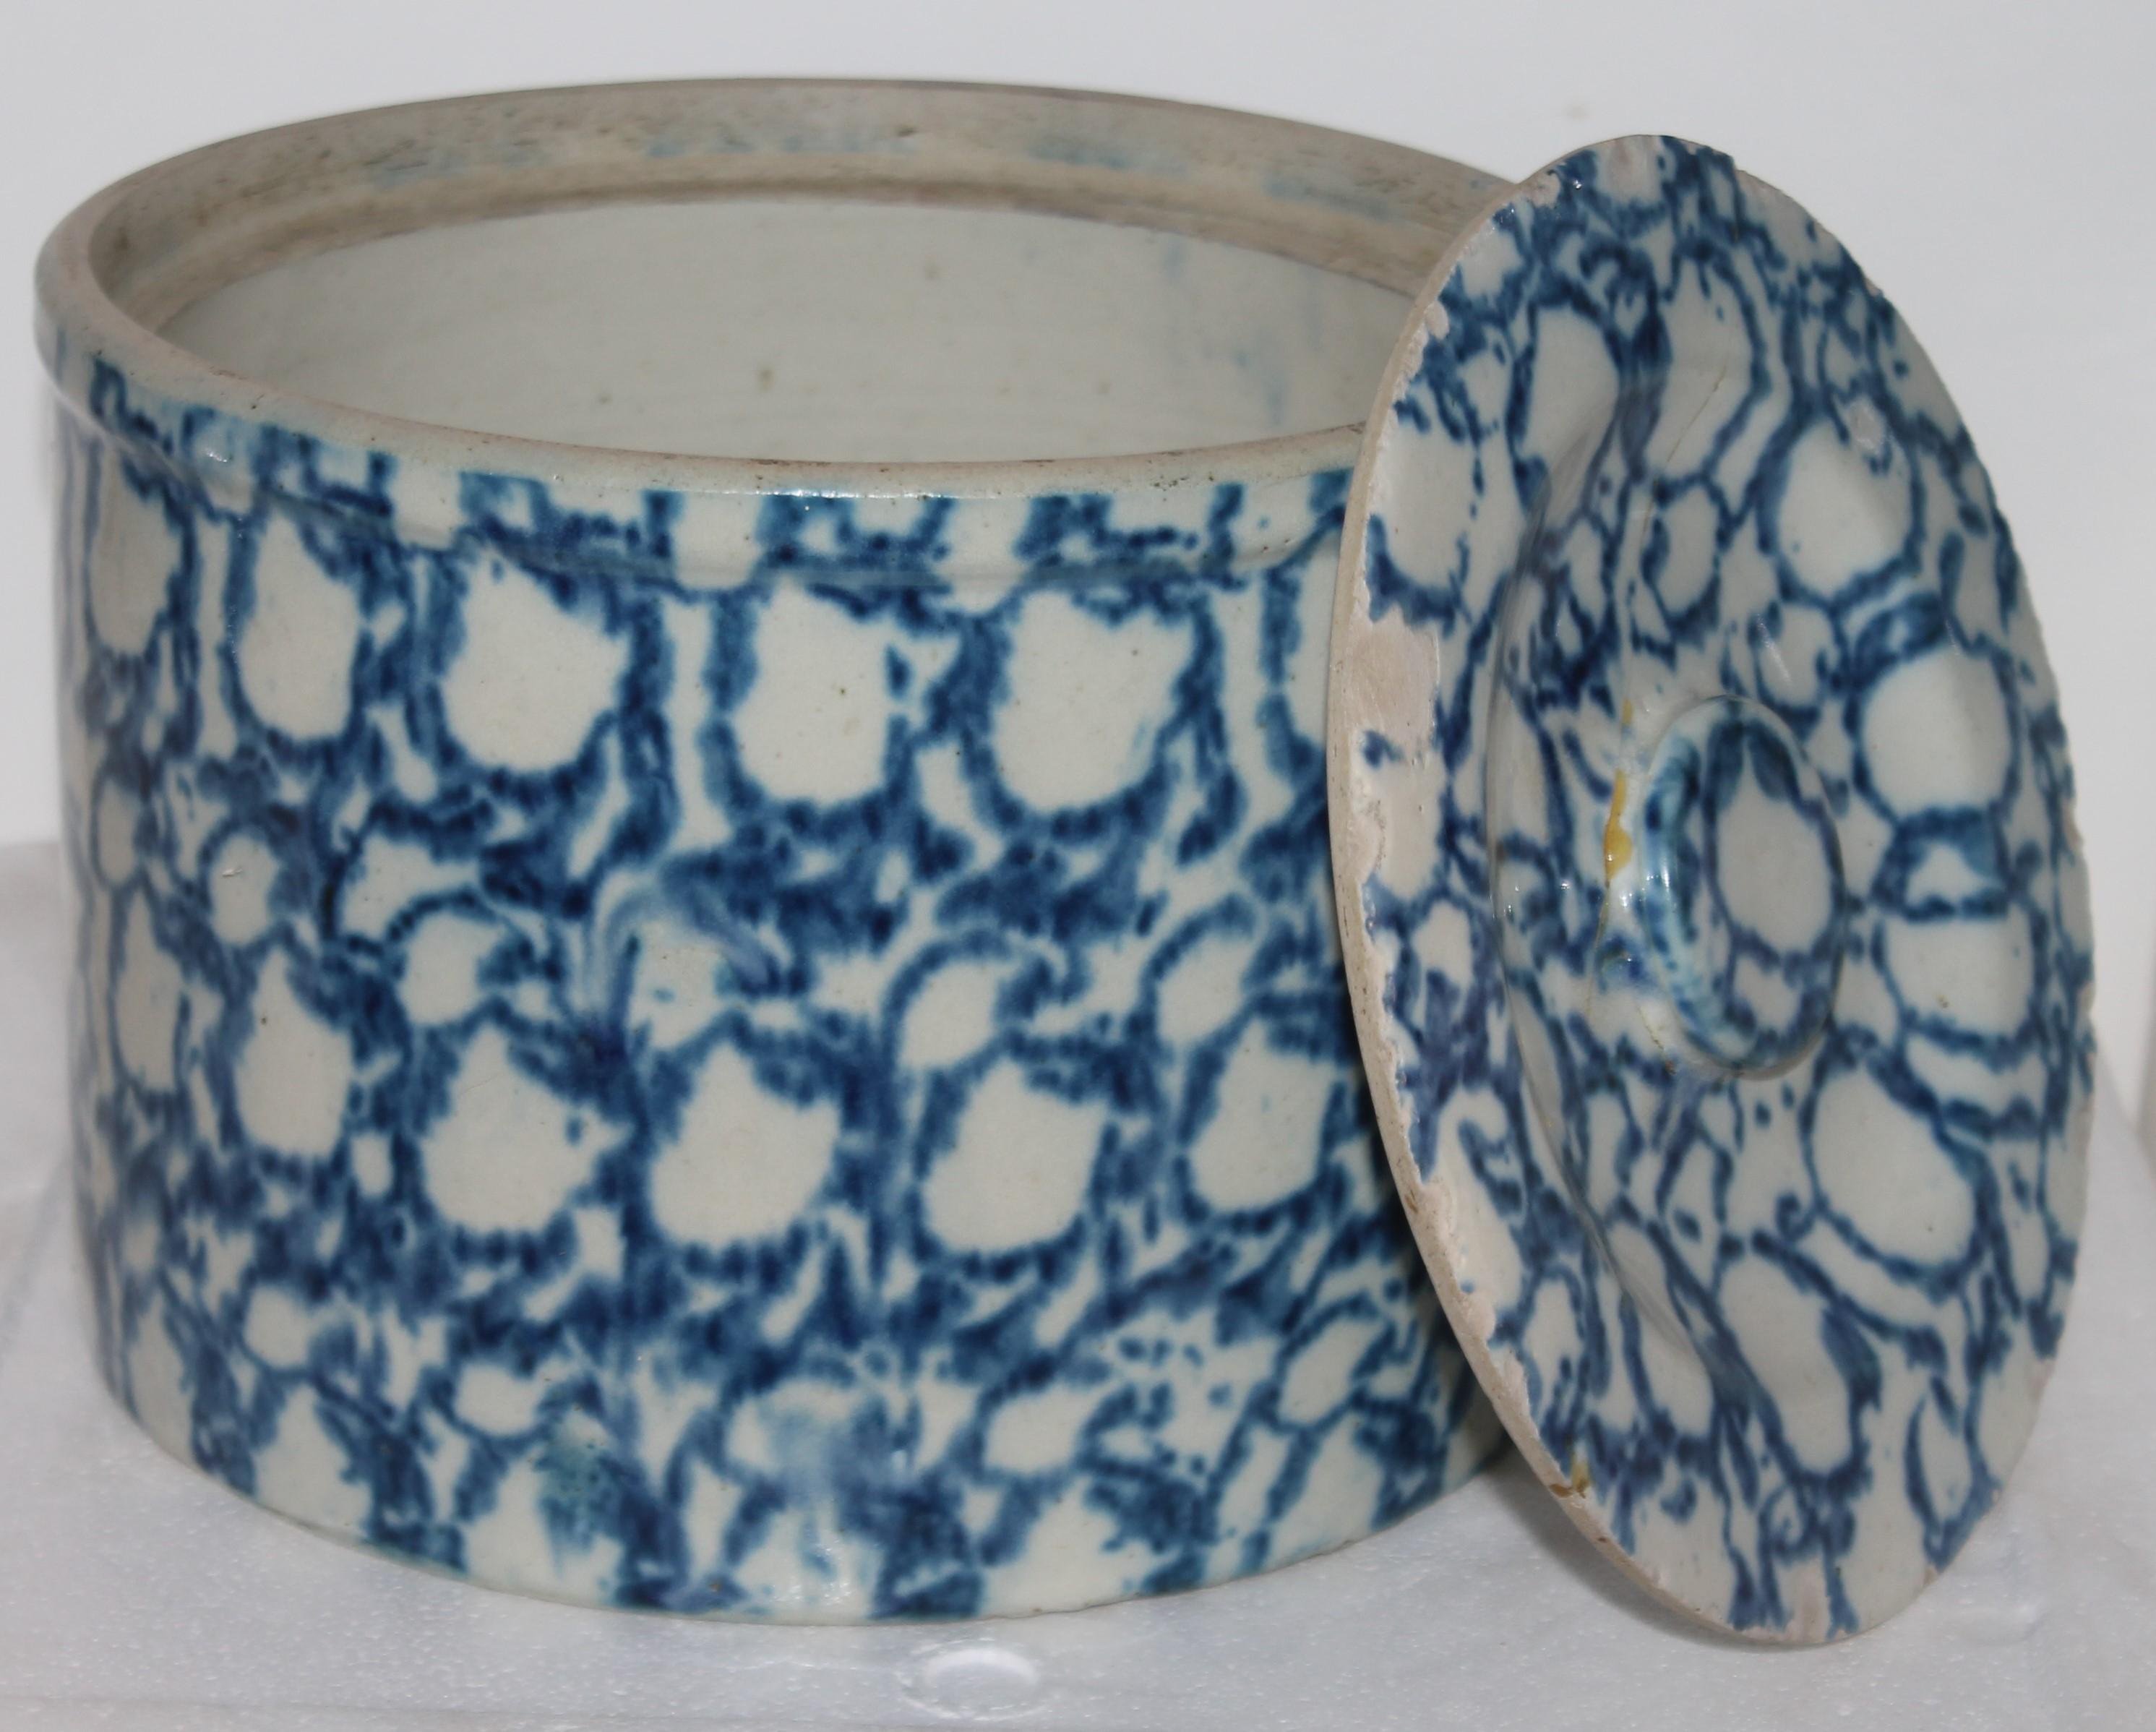 Hand-Crafted 19thc Sponge Ware Large Butter Crock